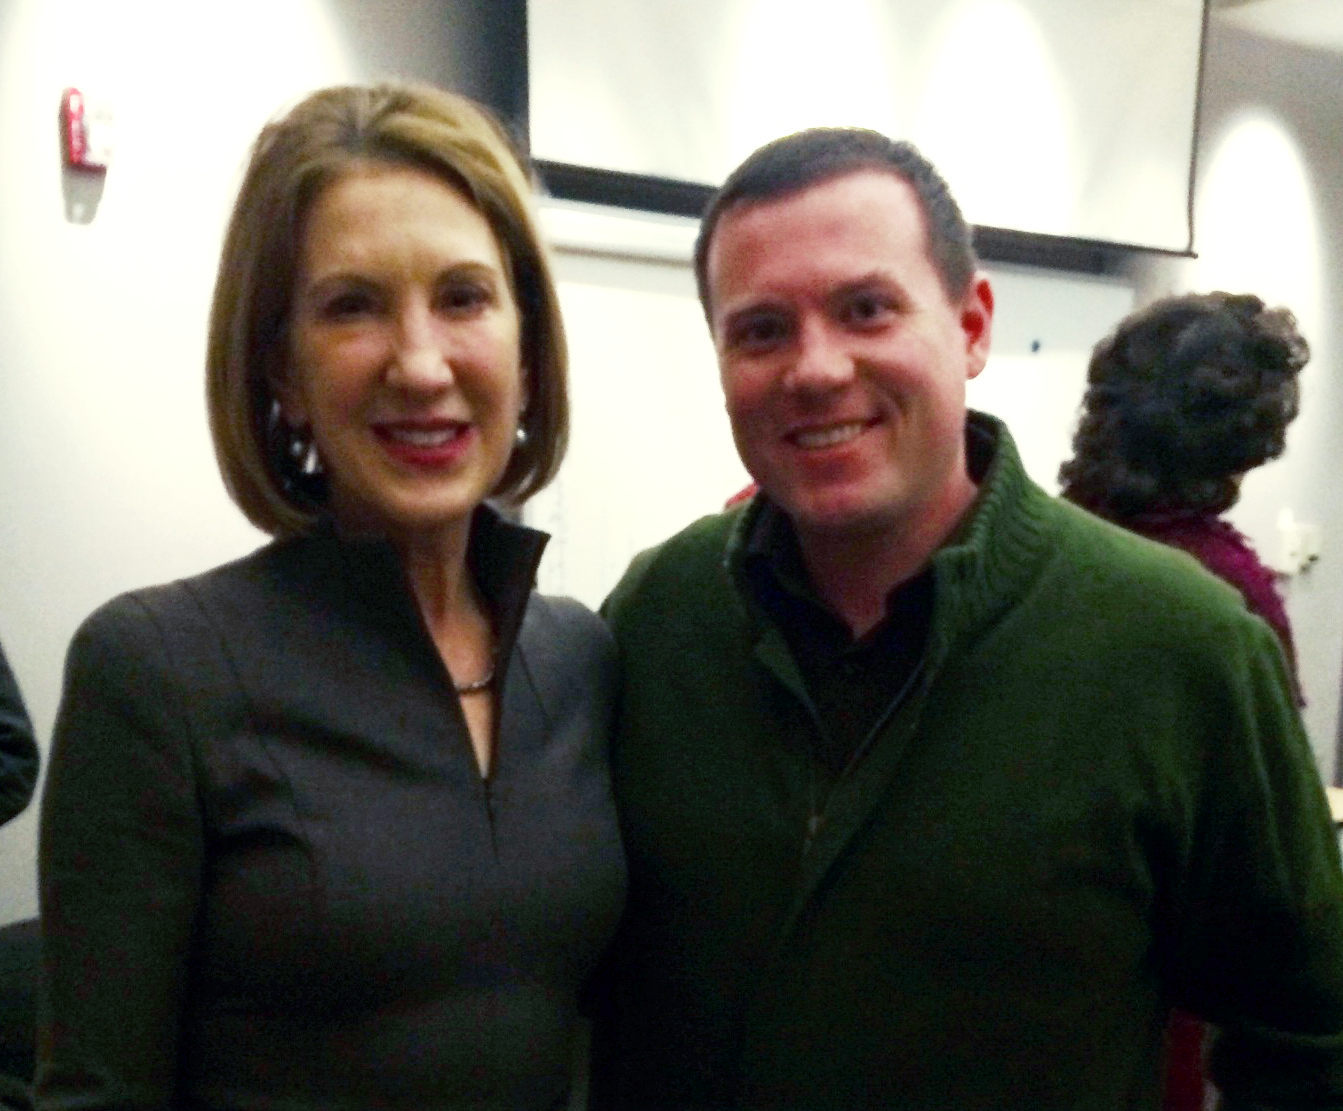 Carly Fiorina: On Charity, China, Crime, and Citizenship